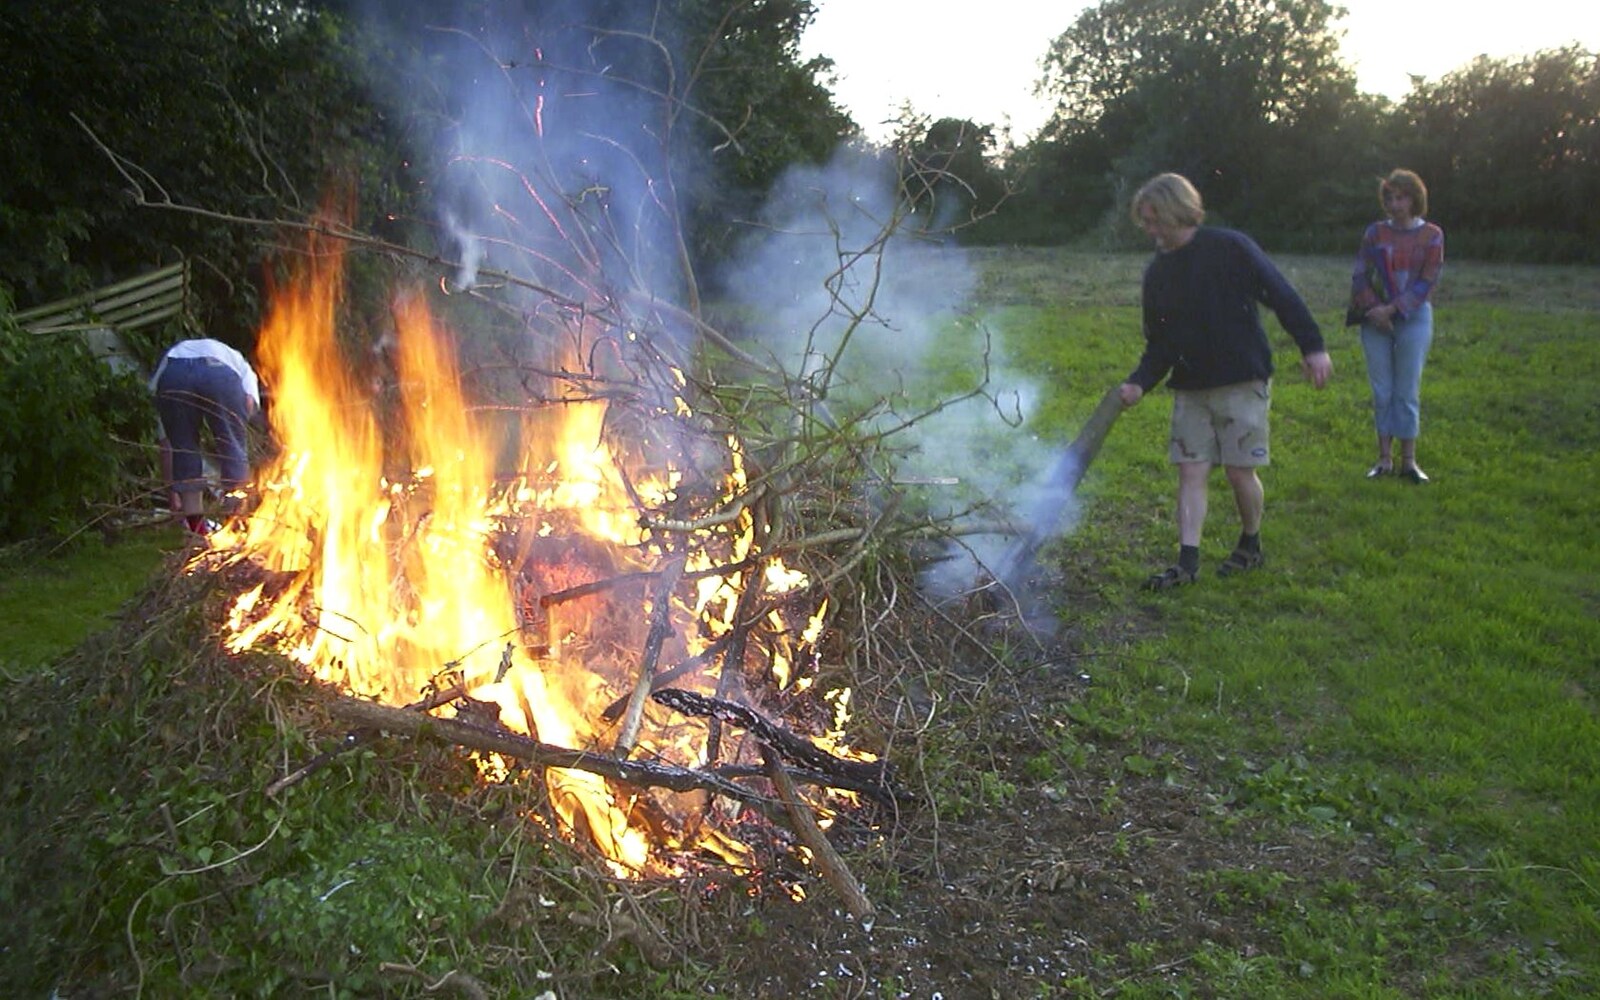 Marc hurls a plank of wood onto the fire from DH's BSCC Barbeque, The Old Post Office, Brome, Suffolk - 7th July 2002